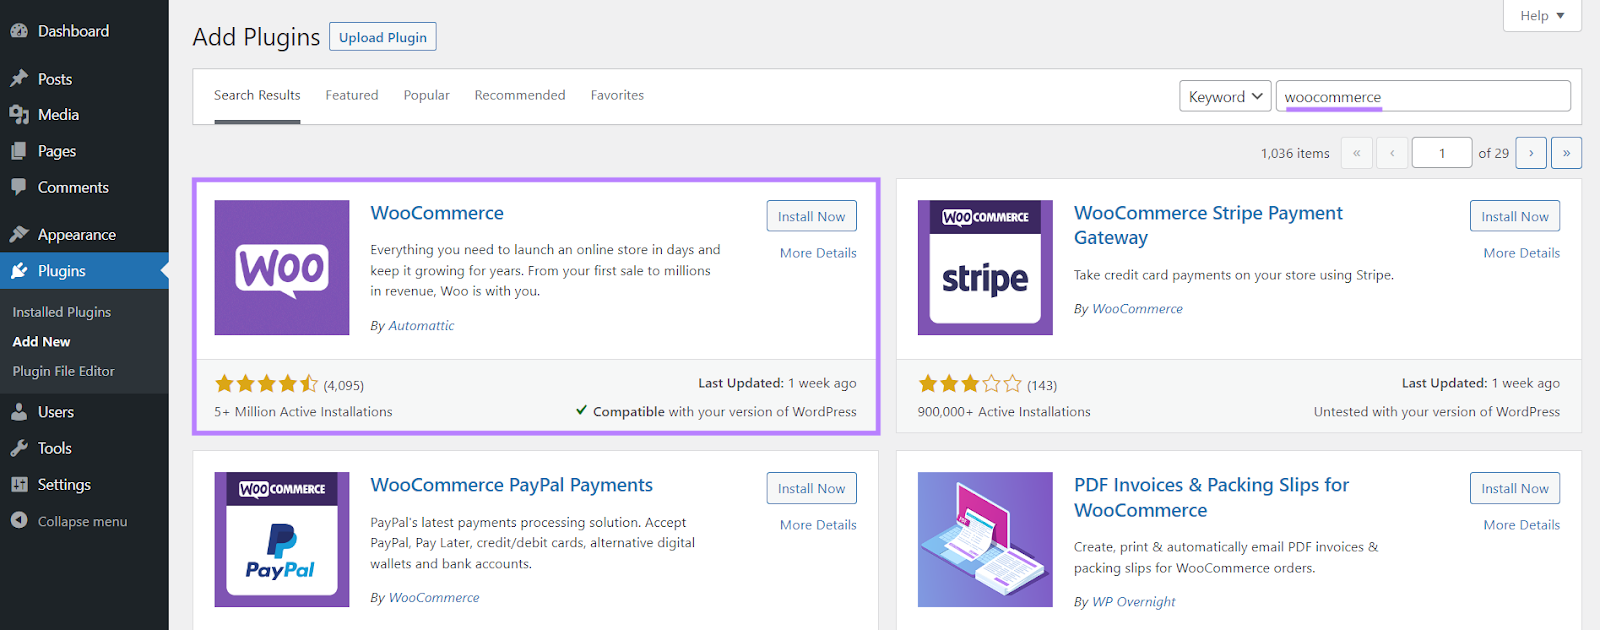 "Add Plugins" page in WordPress with WooCommerce plugin highlighted